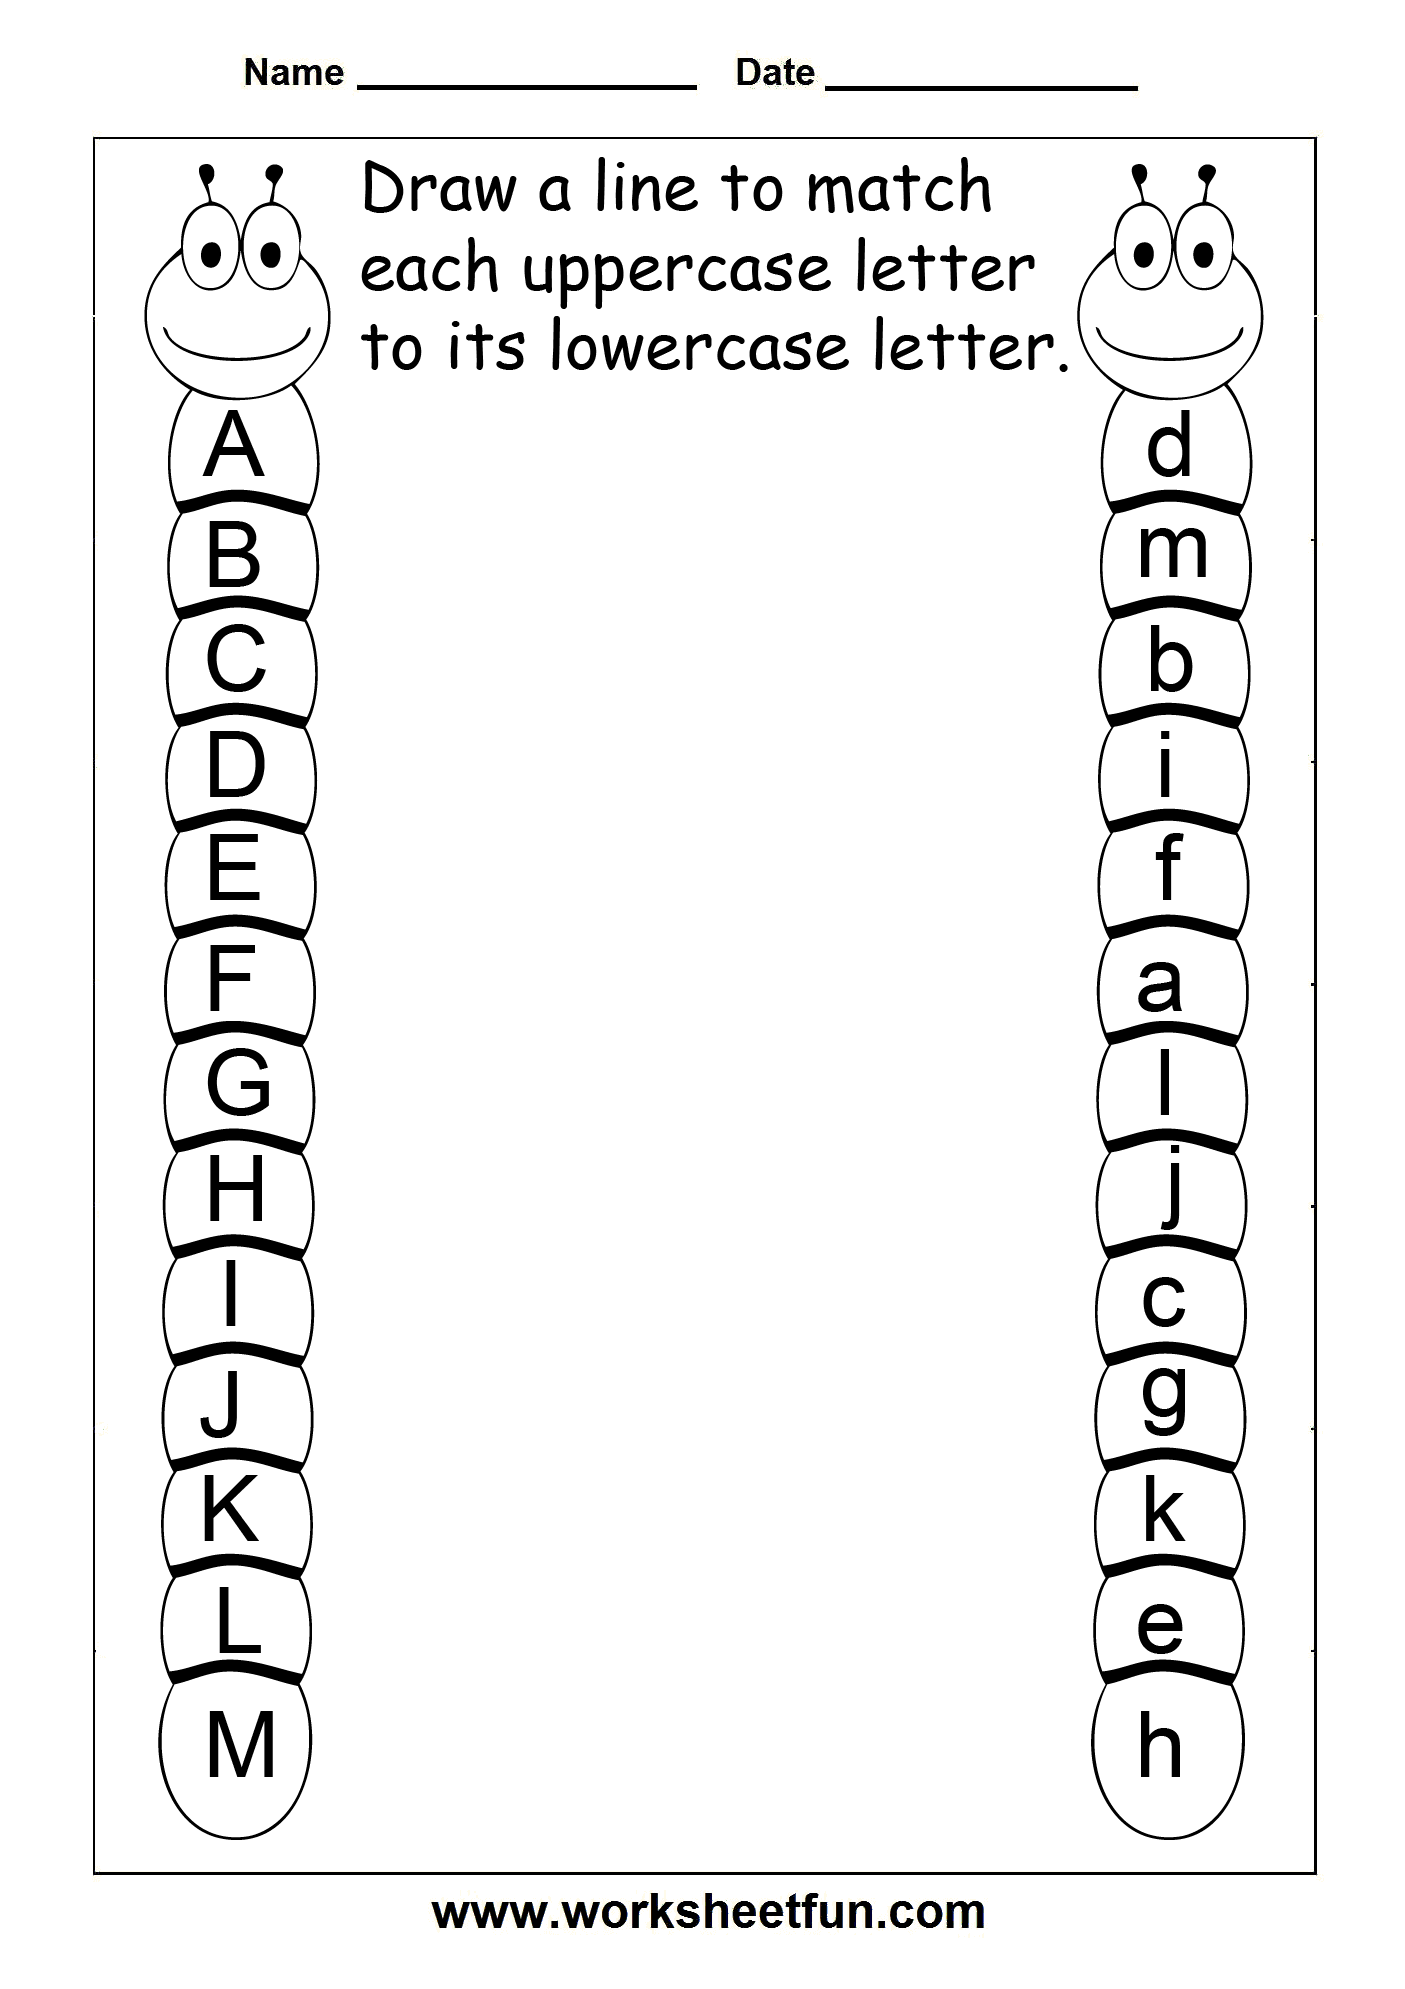 match-uppercase-and-lowercase-letters-11-worksheets-free-printable-worksheets-worksheetfun